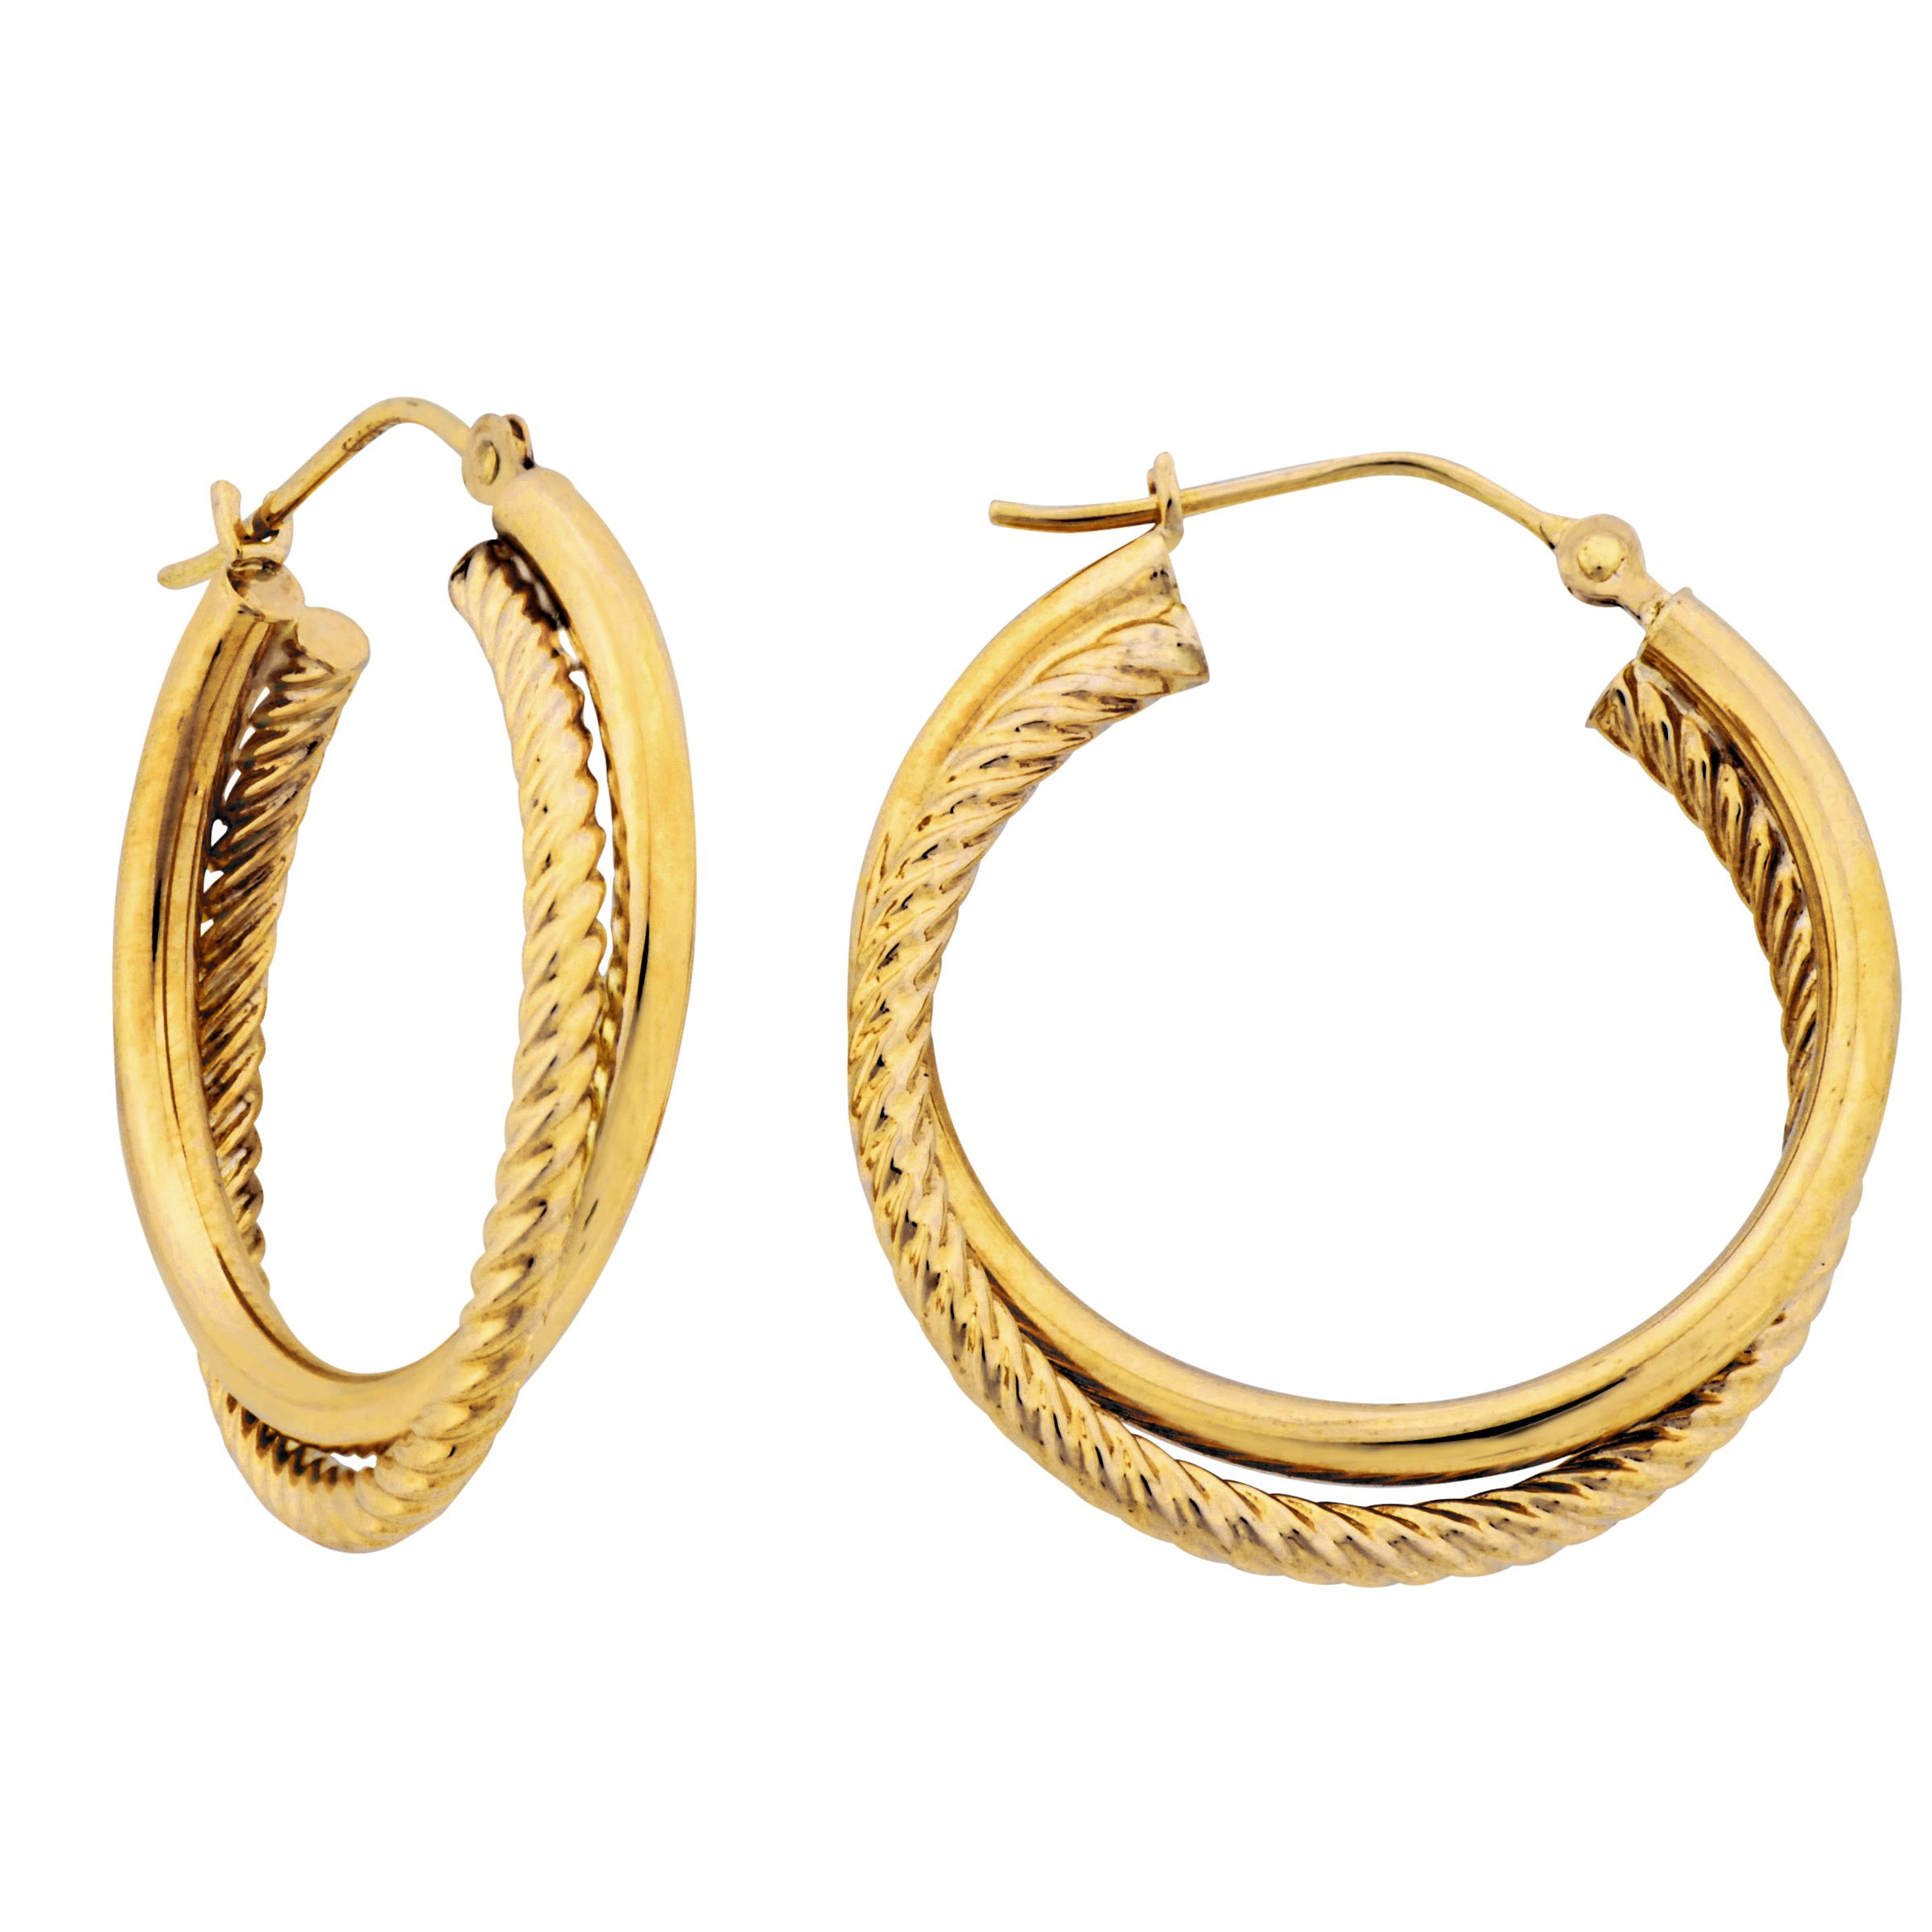 2x23 MM Polished and Etched Double Spiral Hoop Earrings. 14K Yellow Gold